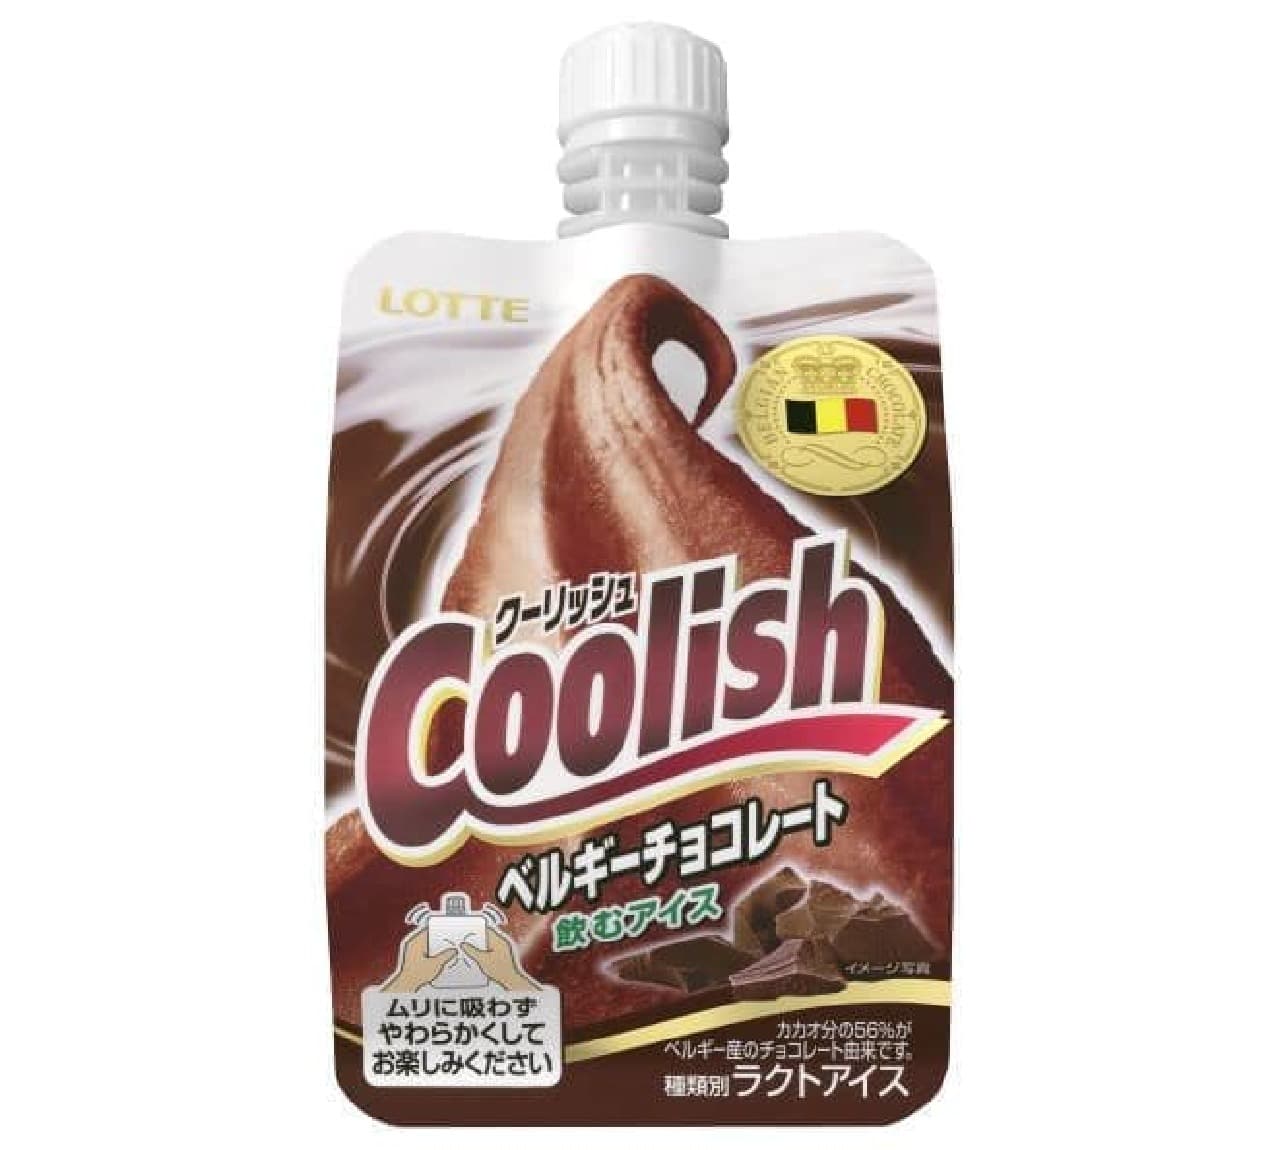 "Coolish Belgian chocolate" is a coolish made from Belgian chocolate.